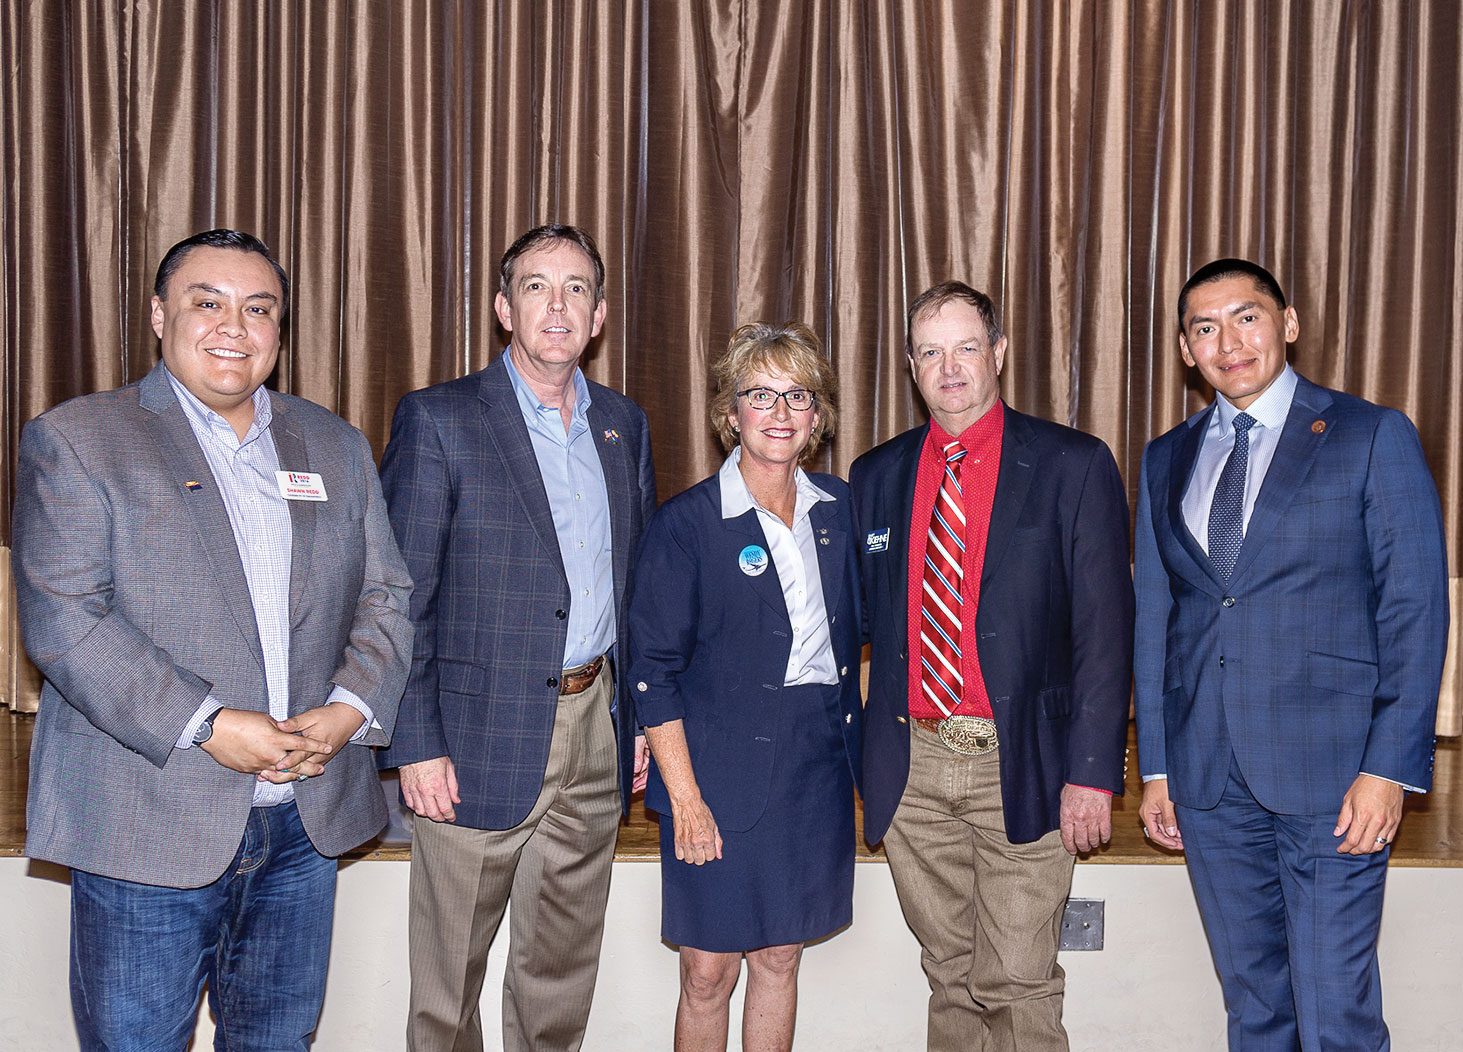 Congressional candidates, left to right: Shawn Redd, Ken Bennett, Wendy Rogers, Gary Kiehne and Carlyle Begay